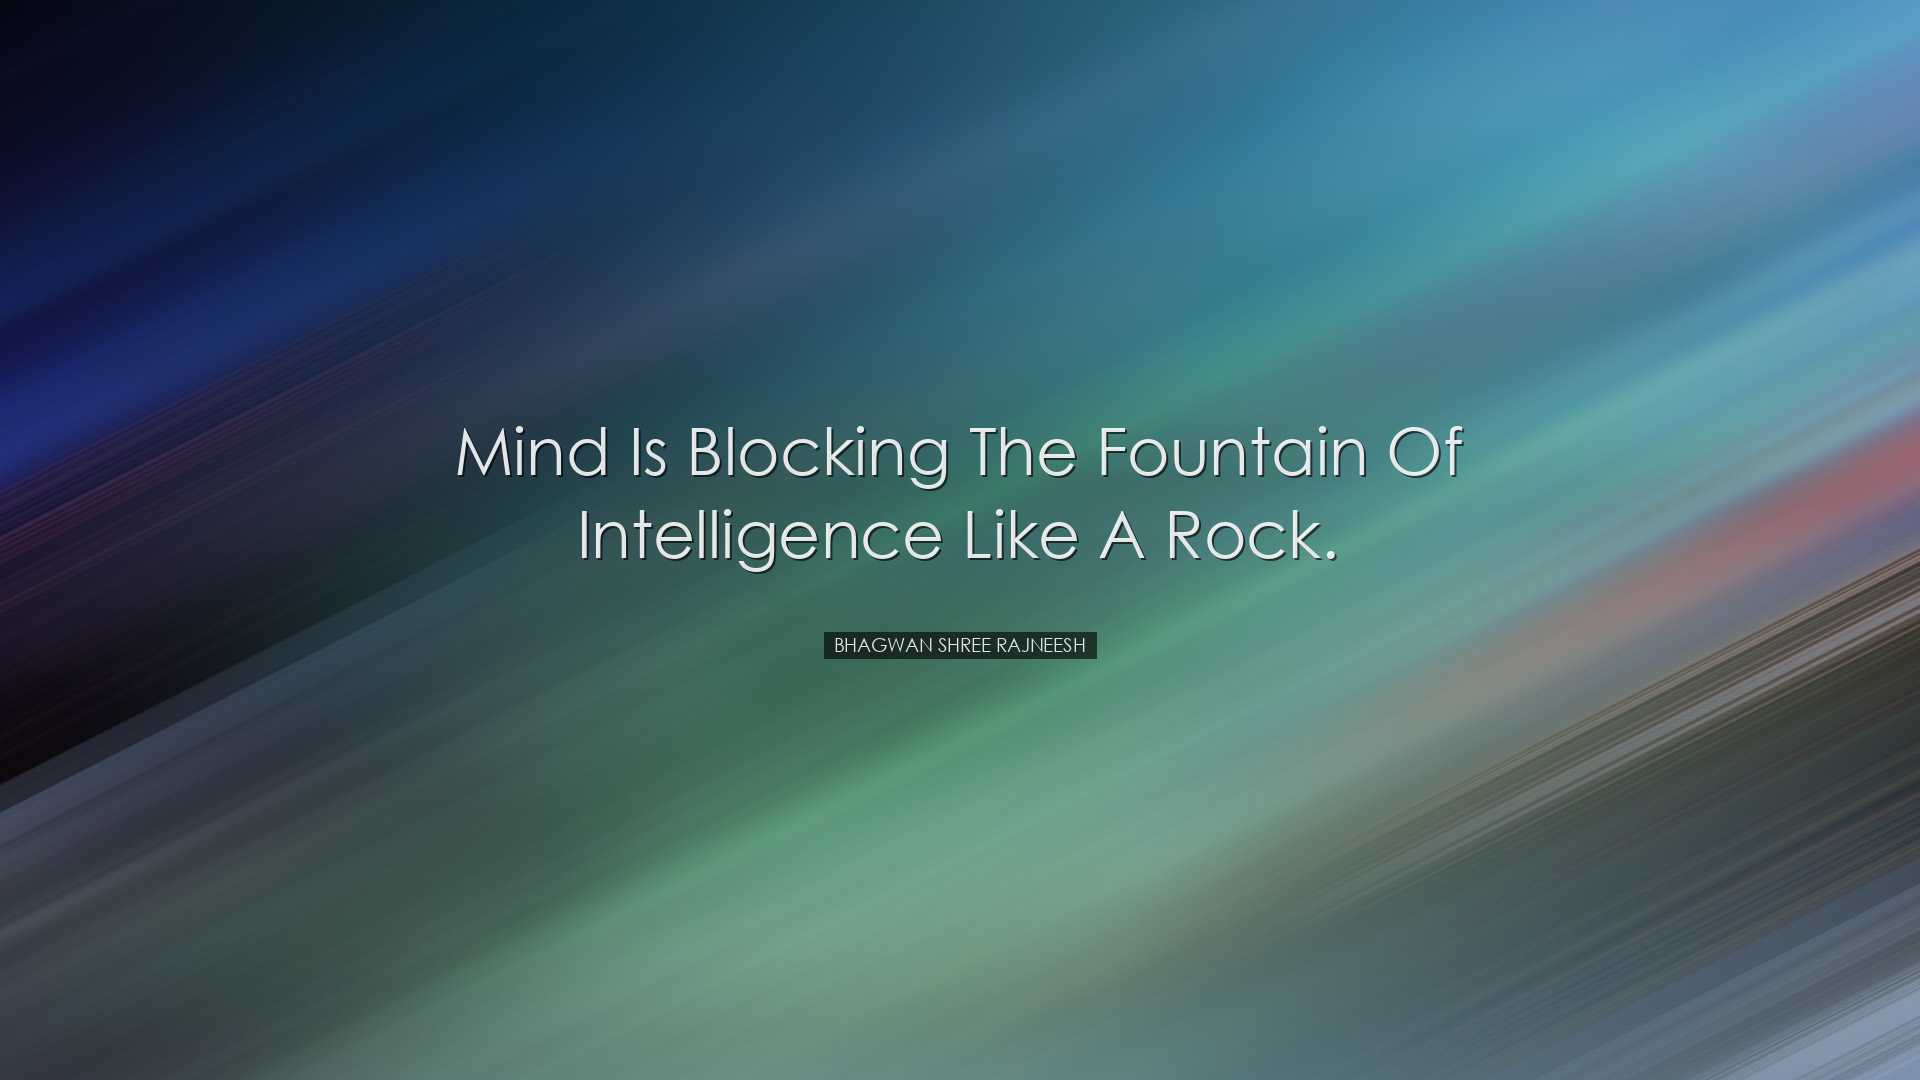 Mind is blocking the fountain of intelligence like a rock. - Bhagw